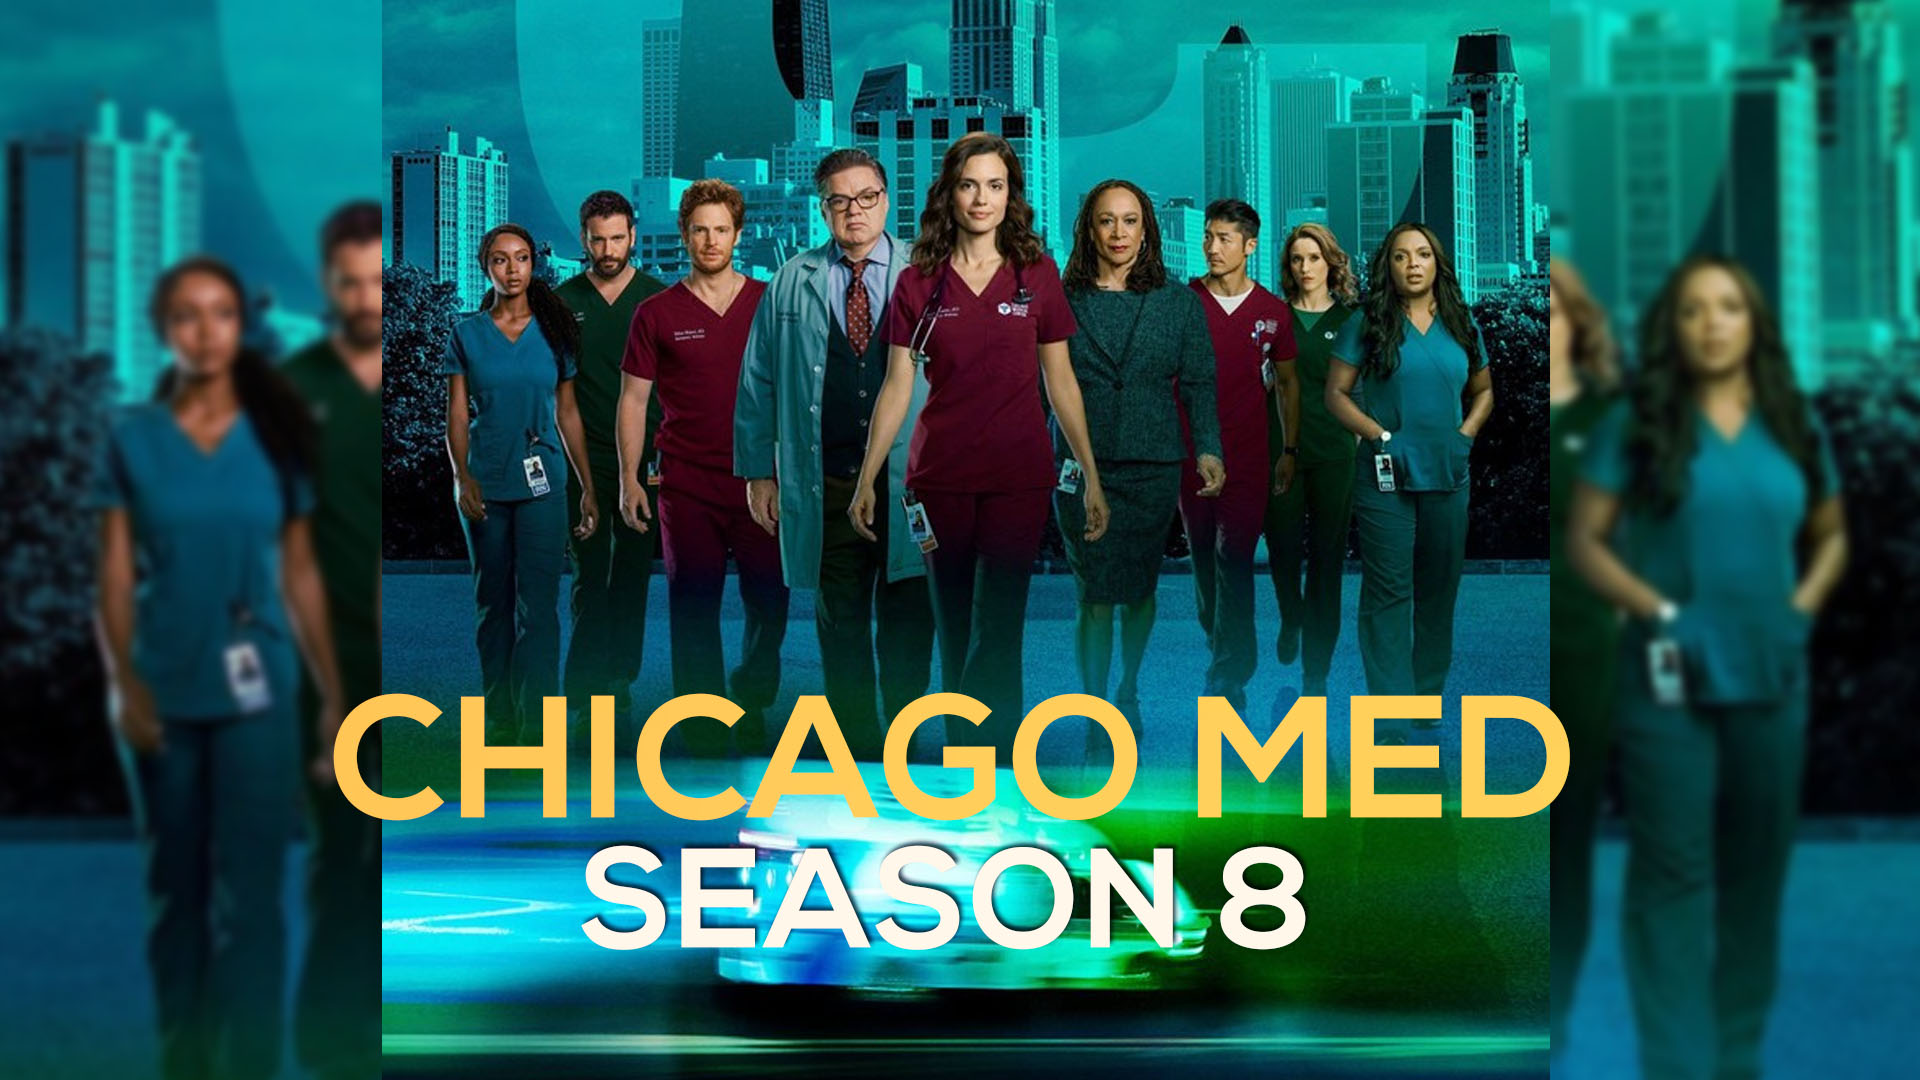 Chicago Med Season 8 Release Date, Trailer, Storyline and More Details